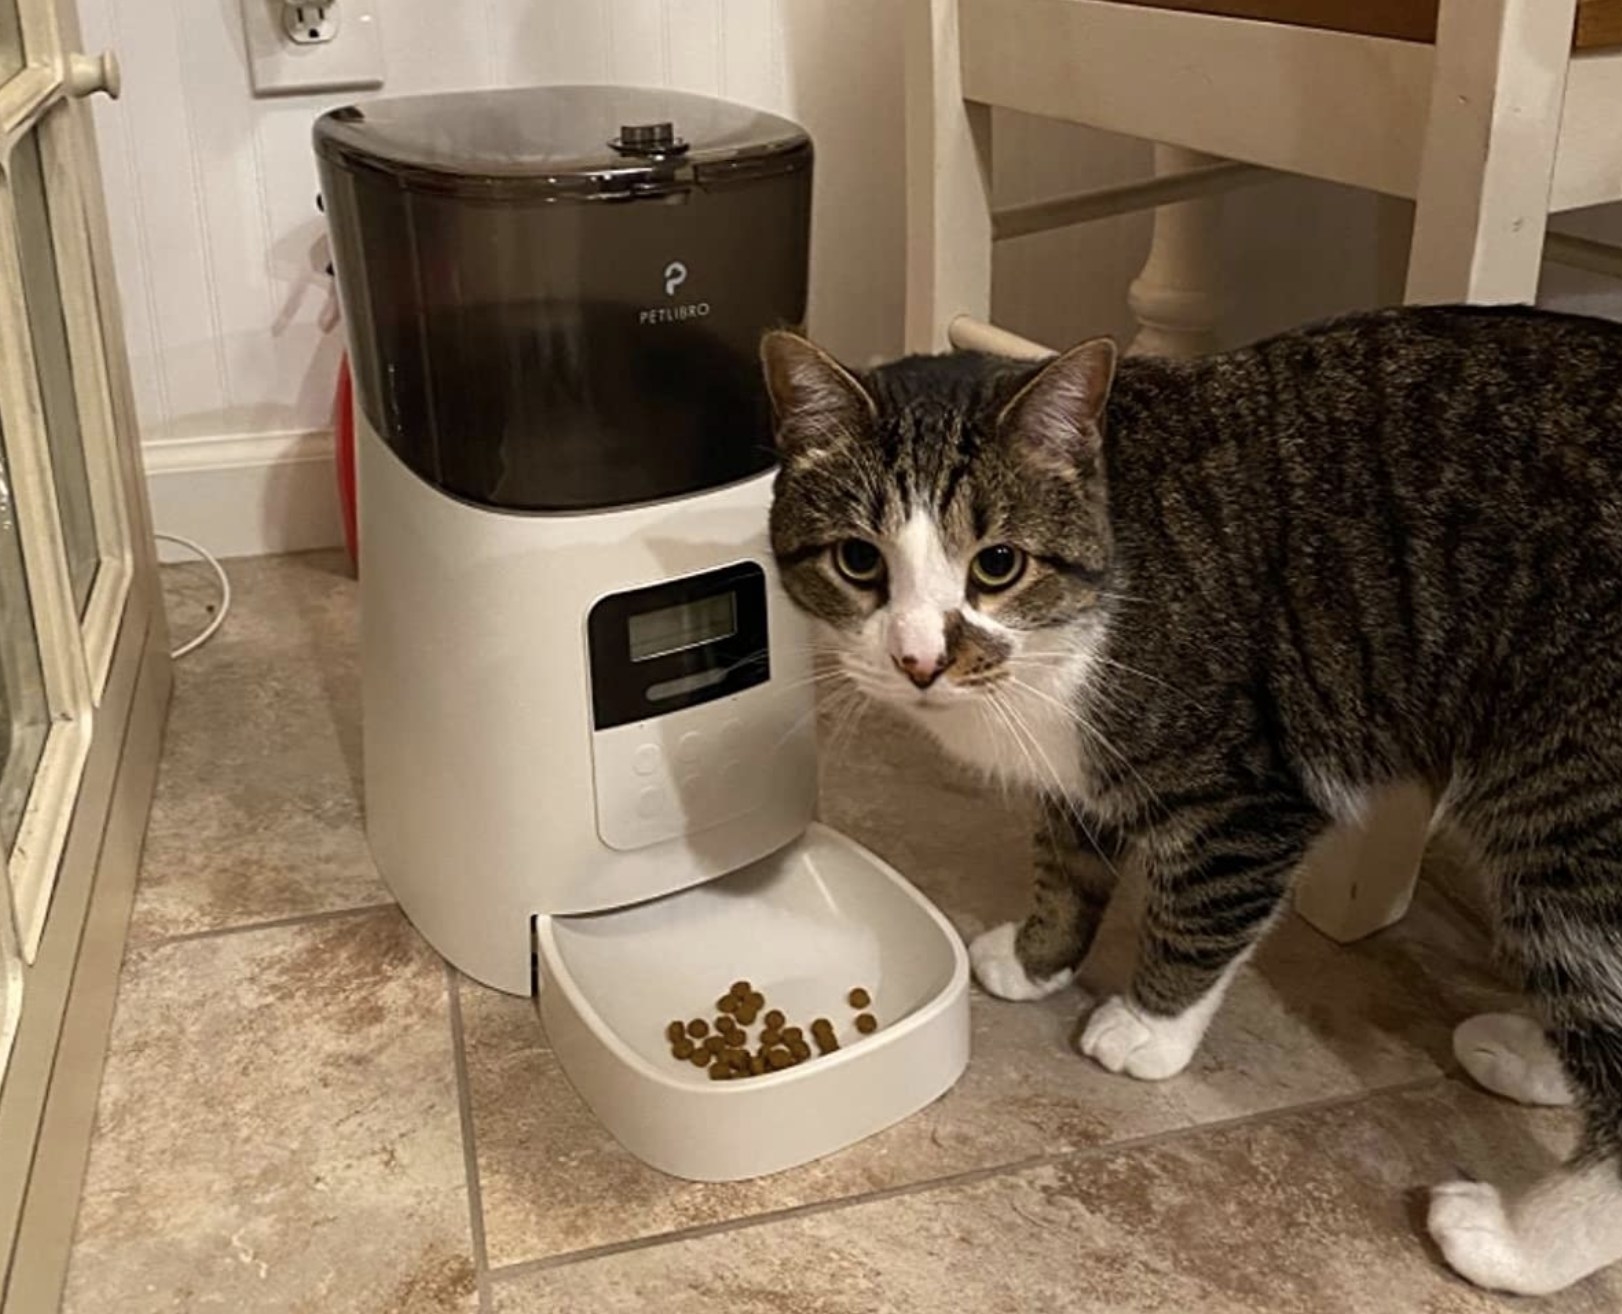 a striped cat eating kibble out of a white and grey automatic food dispenser